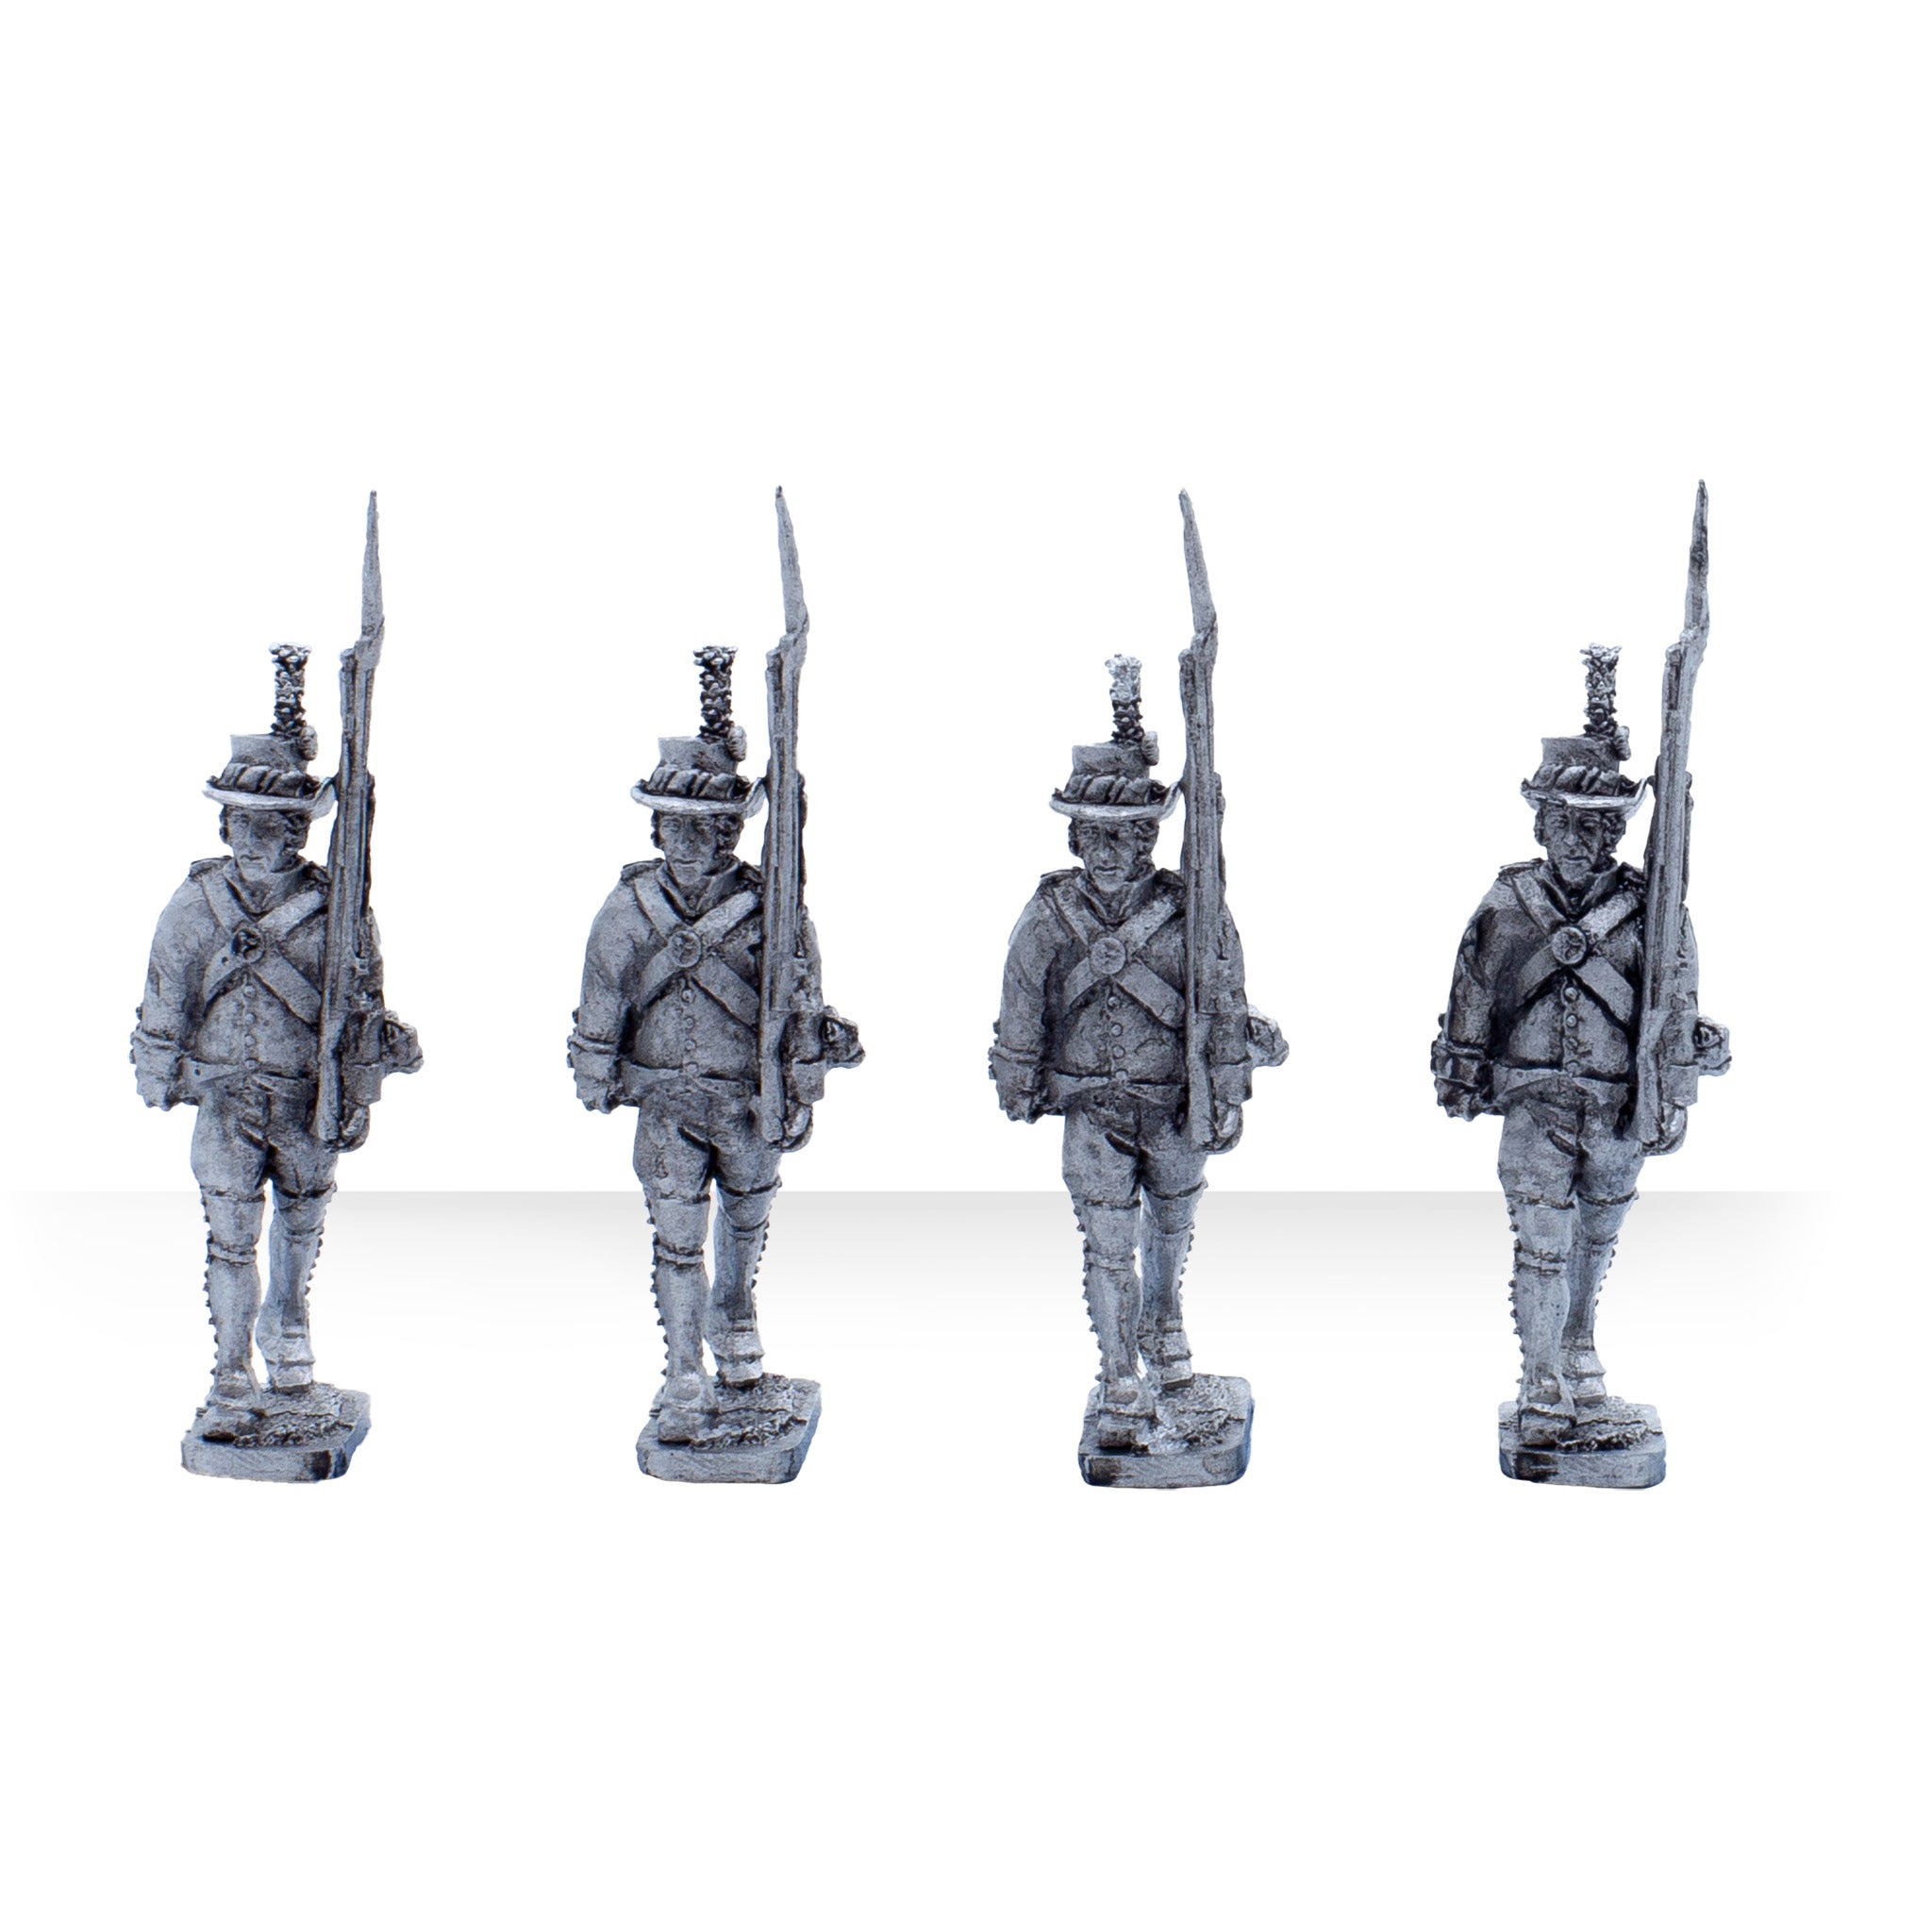 French - Hector's Marines Émigré Infantry x4